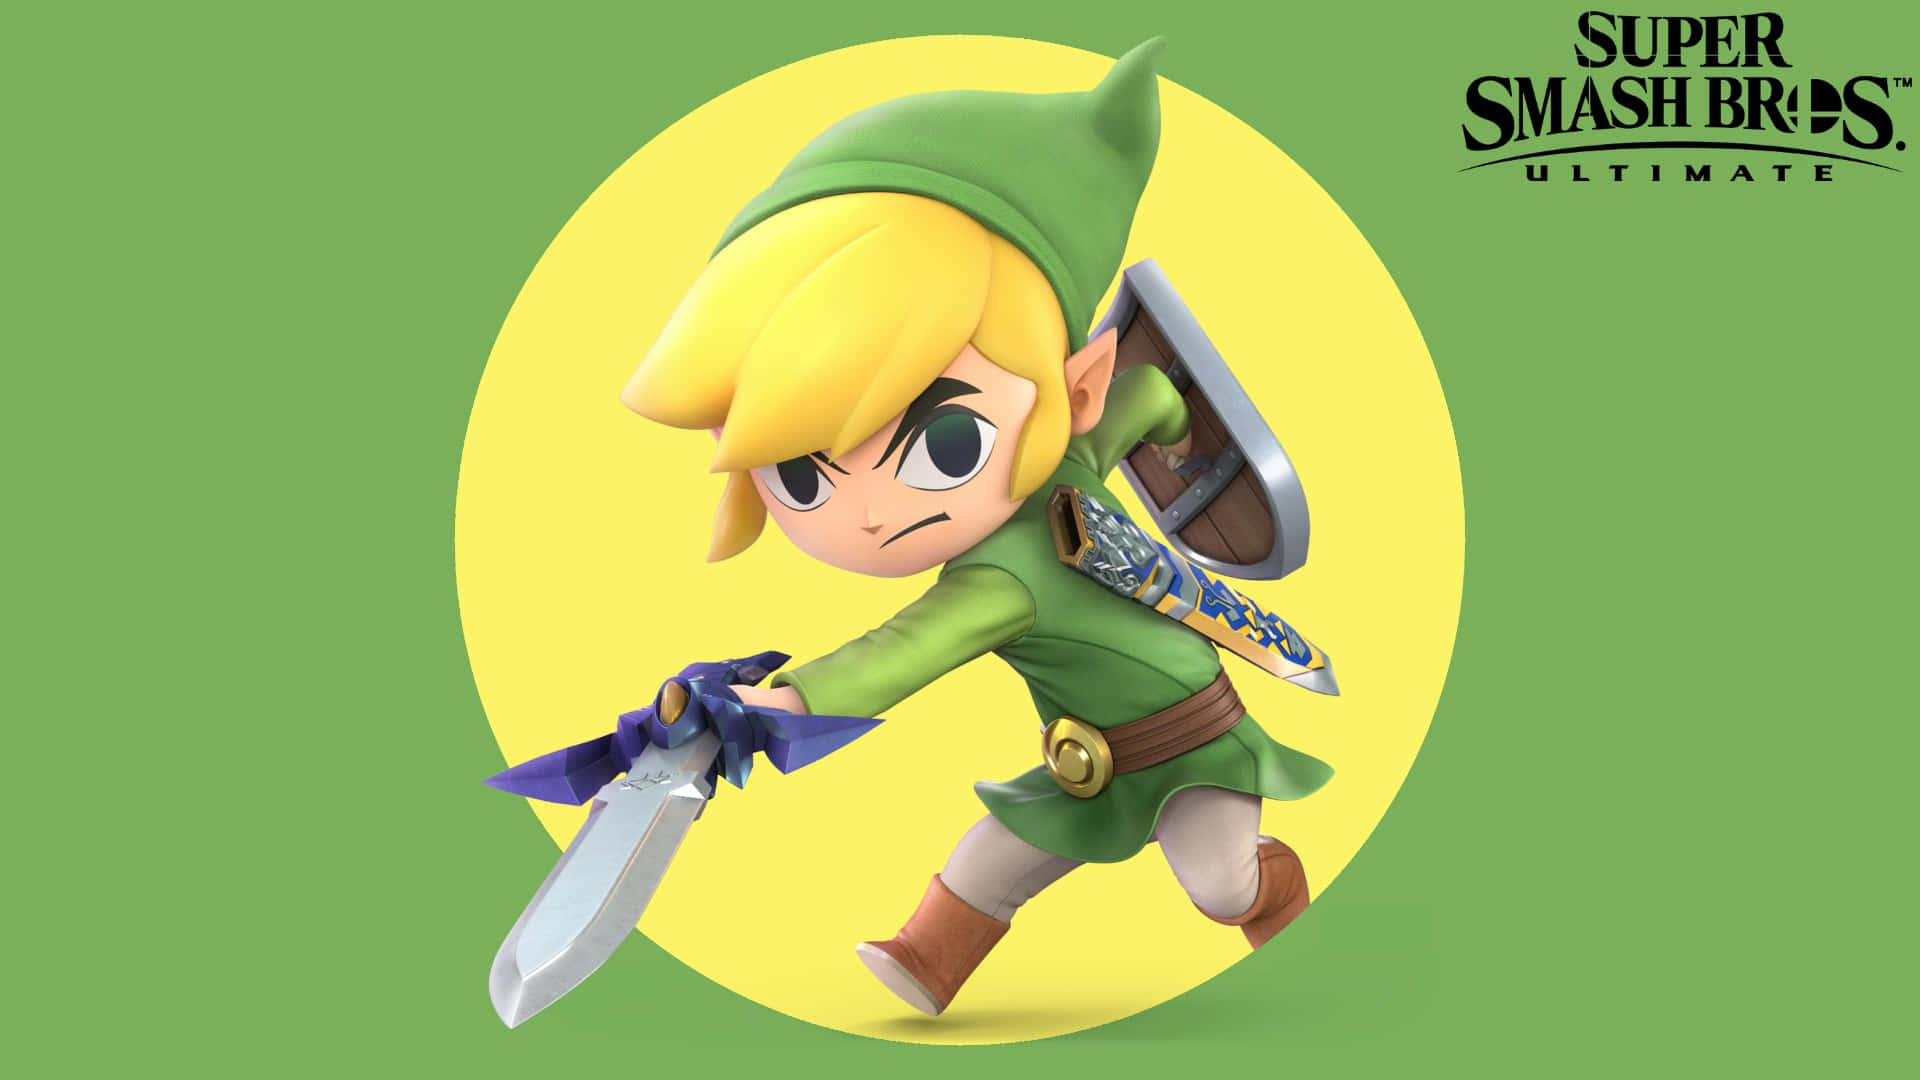 Toon Link In The Super Smash Bros Ultimate